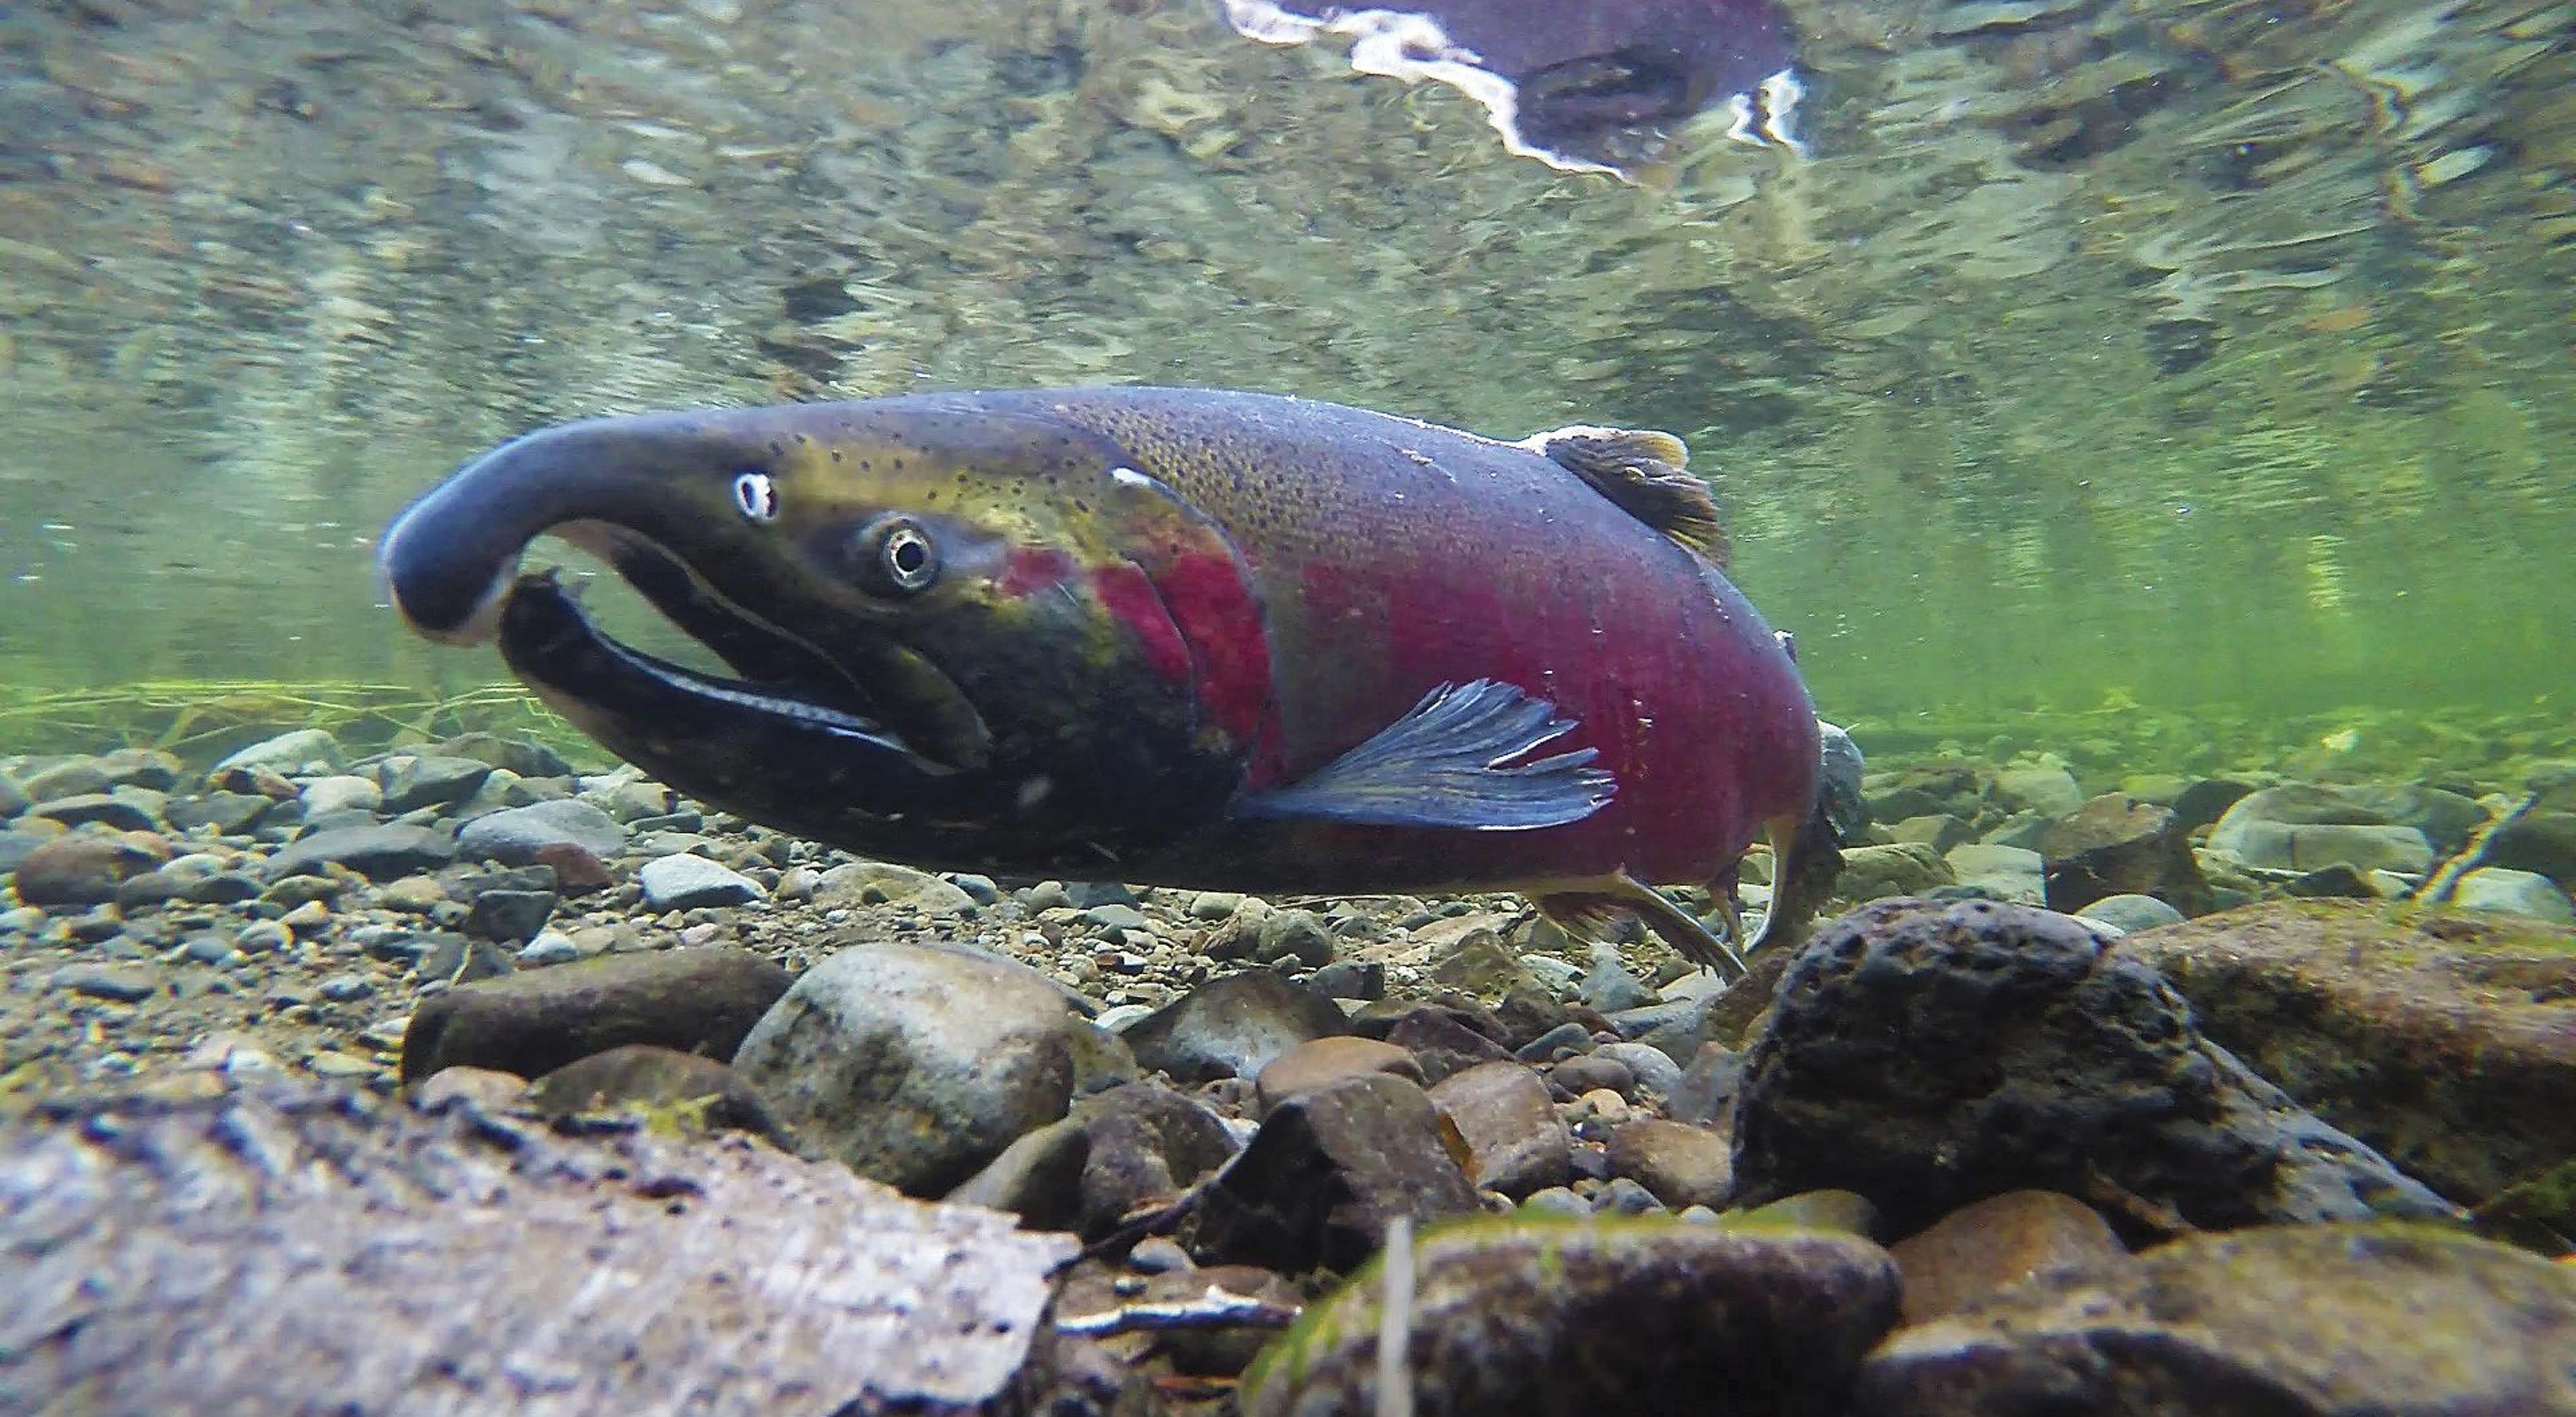 Underwater closeup photo of a Coho salmon spawning in a northern California river.